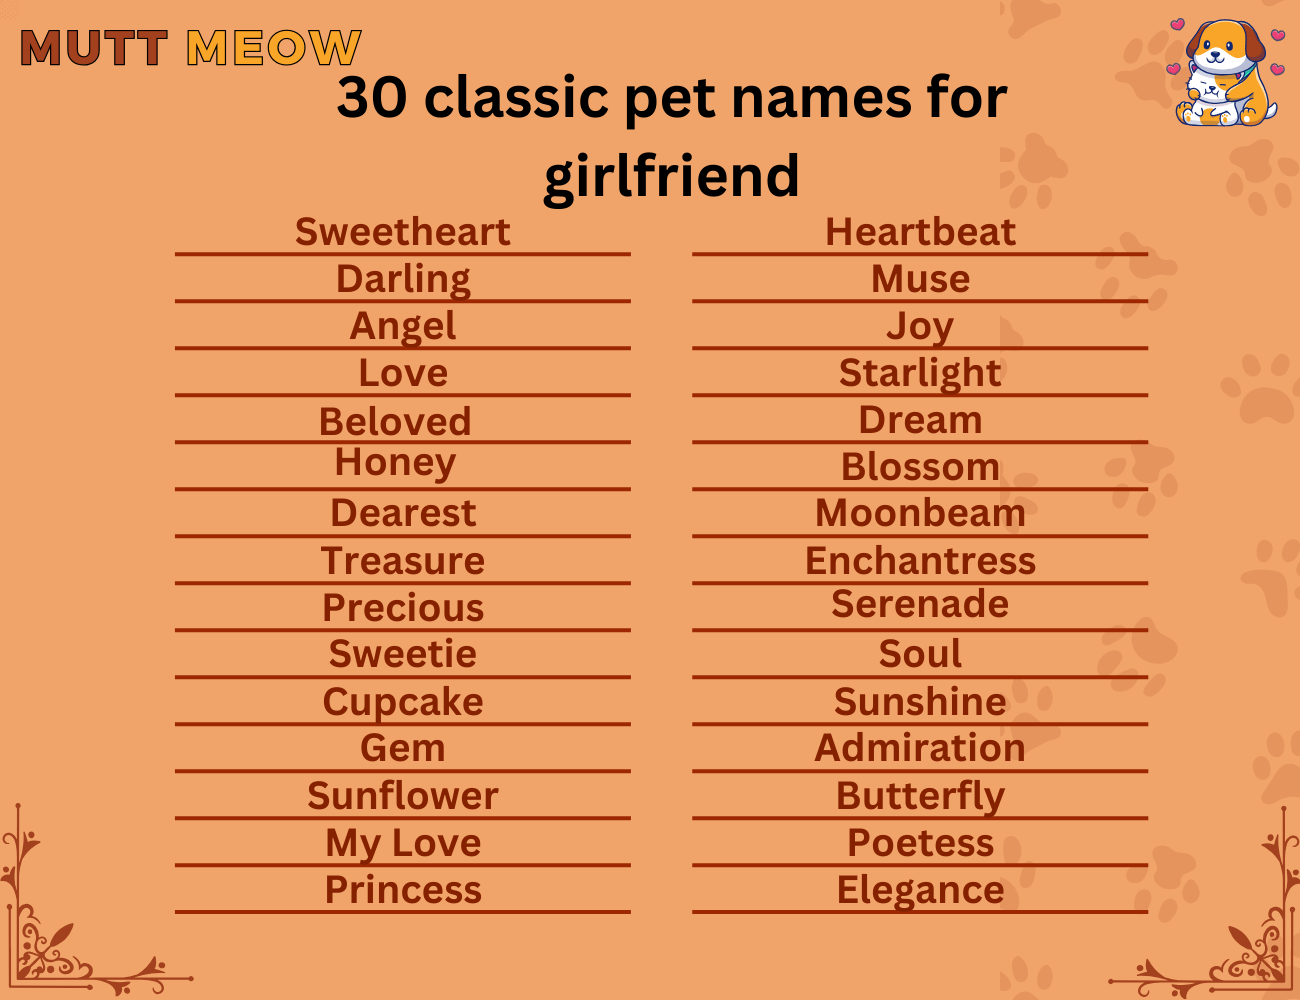 30 classic pet names for girlfriend